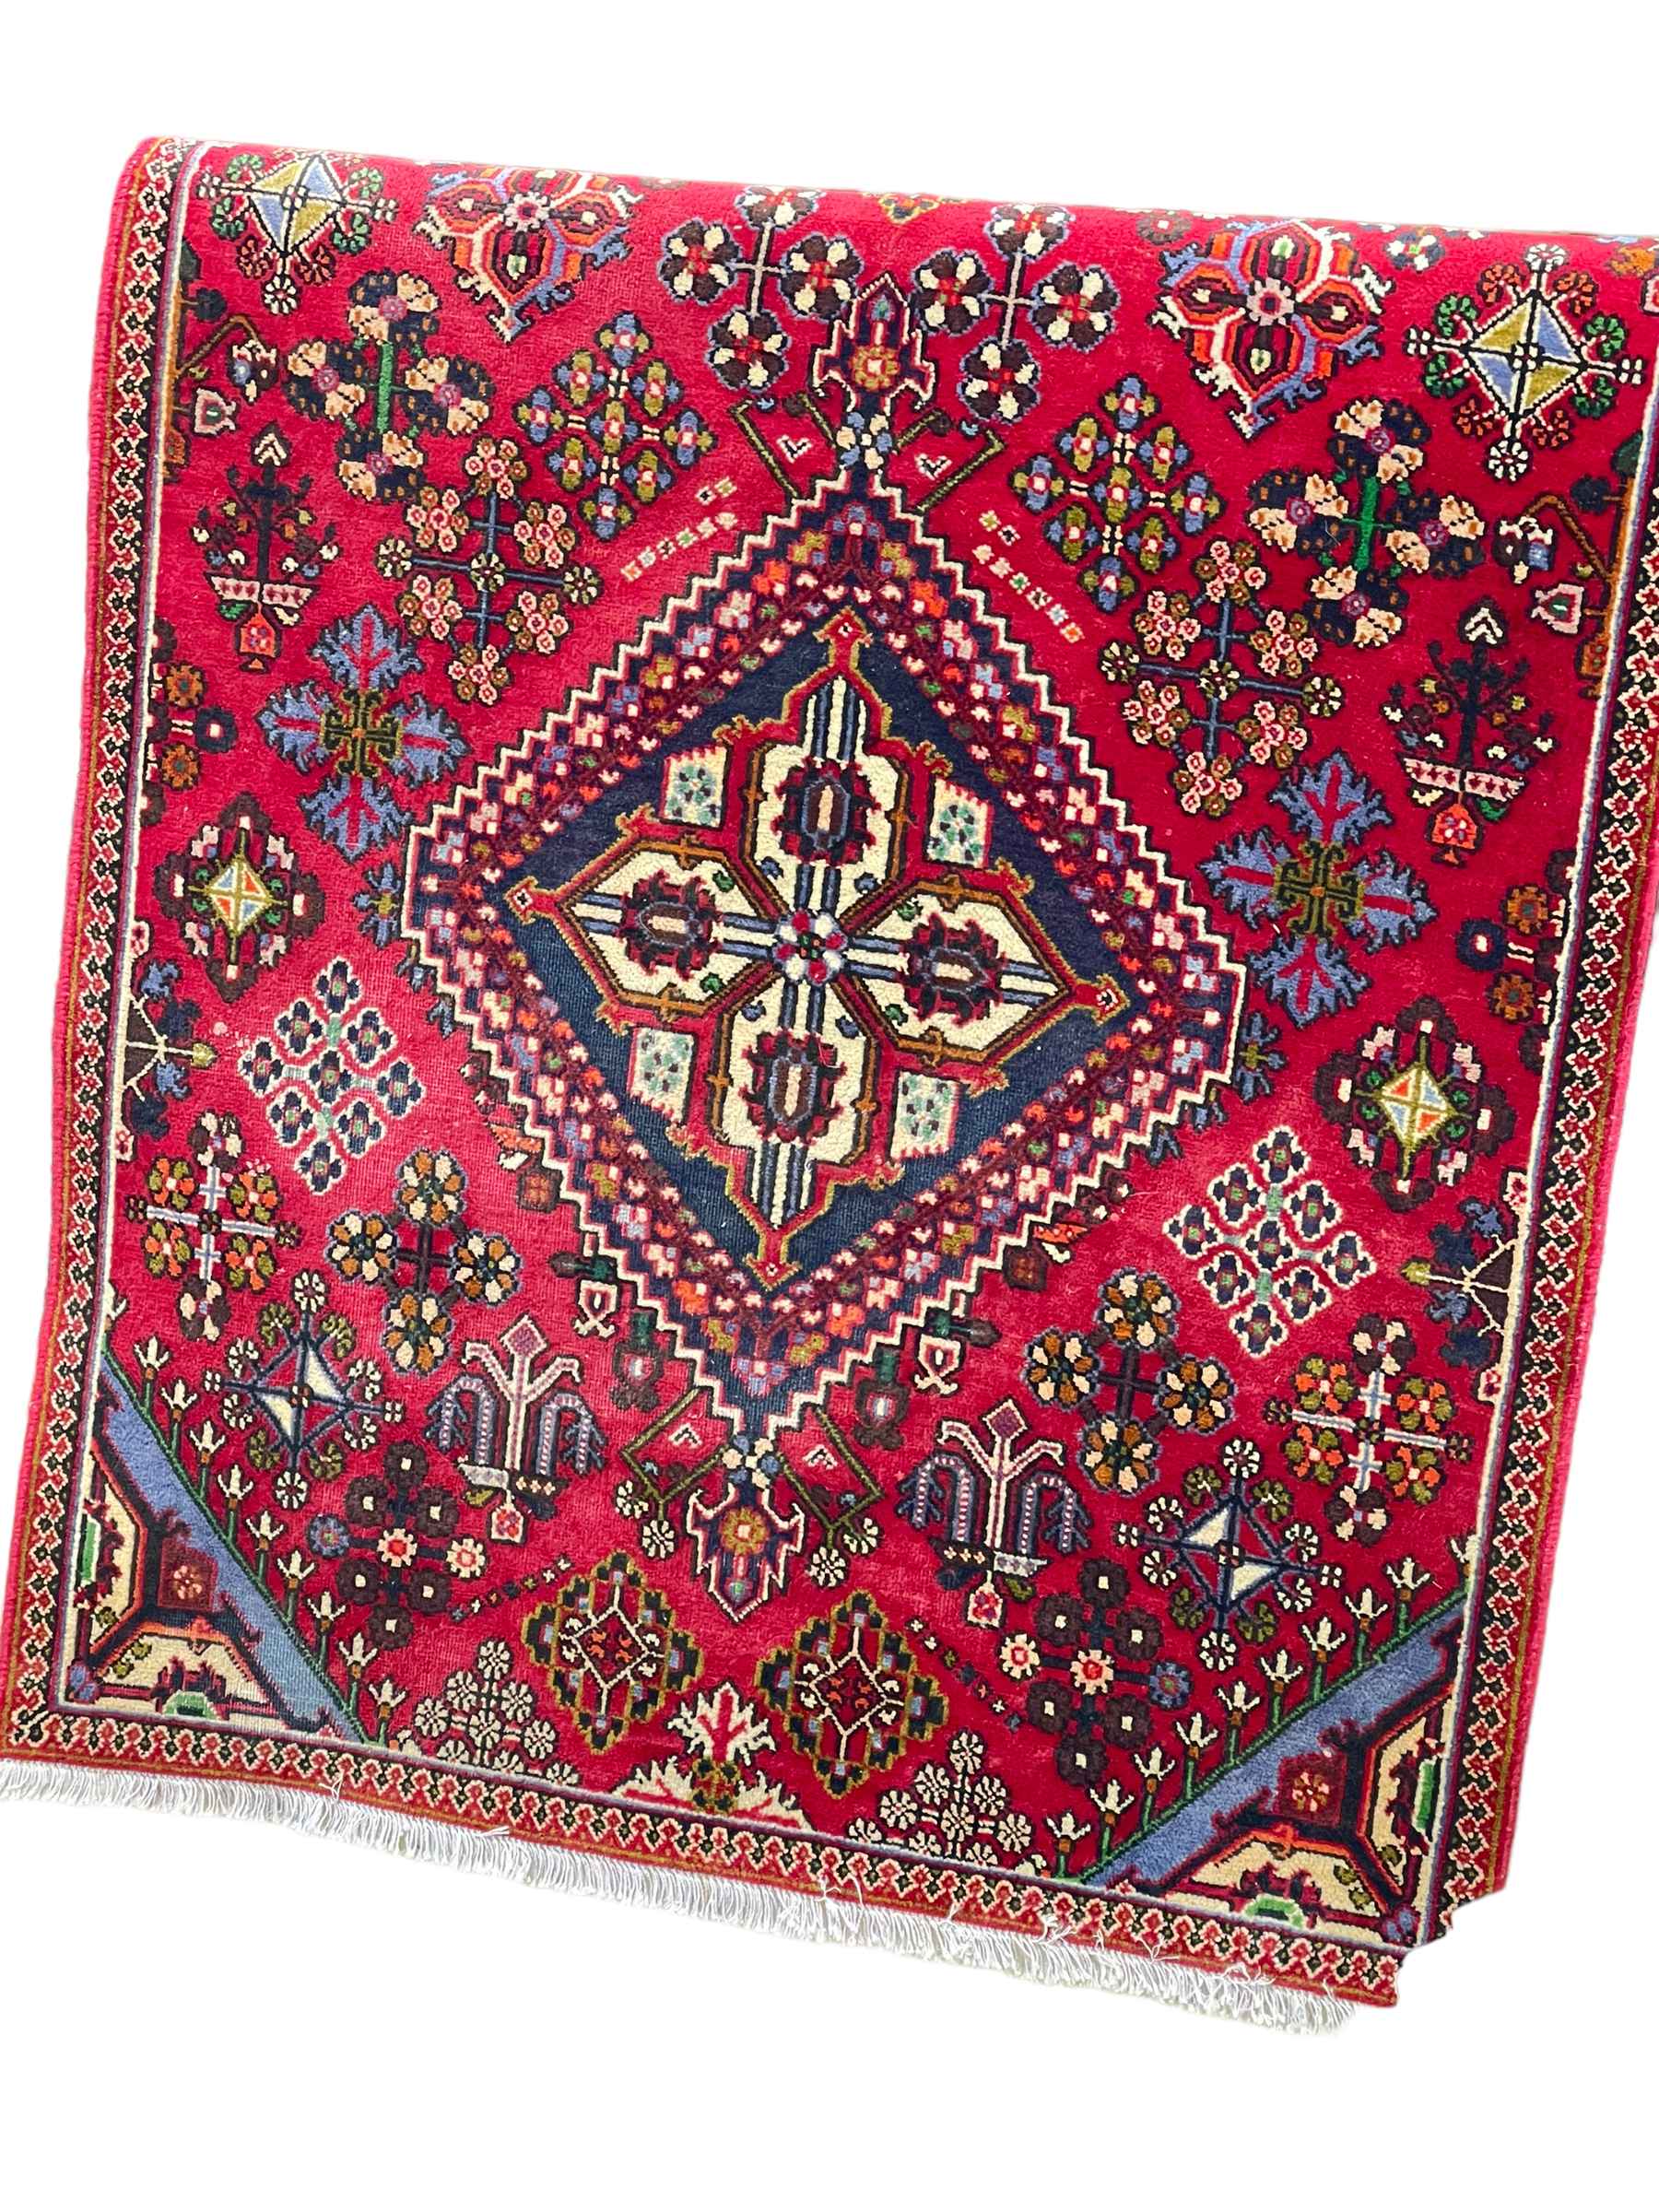 Hand knotted Persian Abadeh carpet runner 3.73 by 1.05.